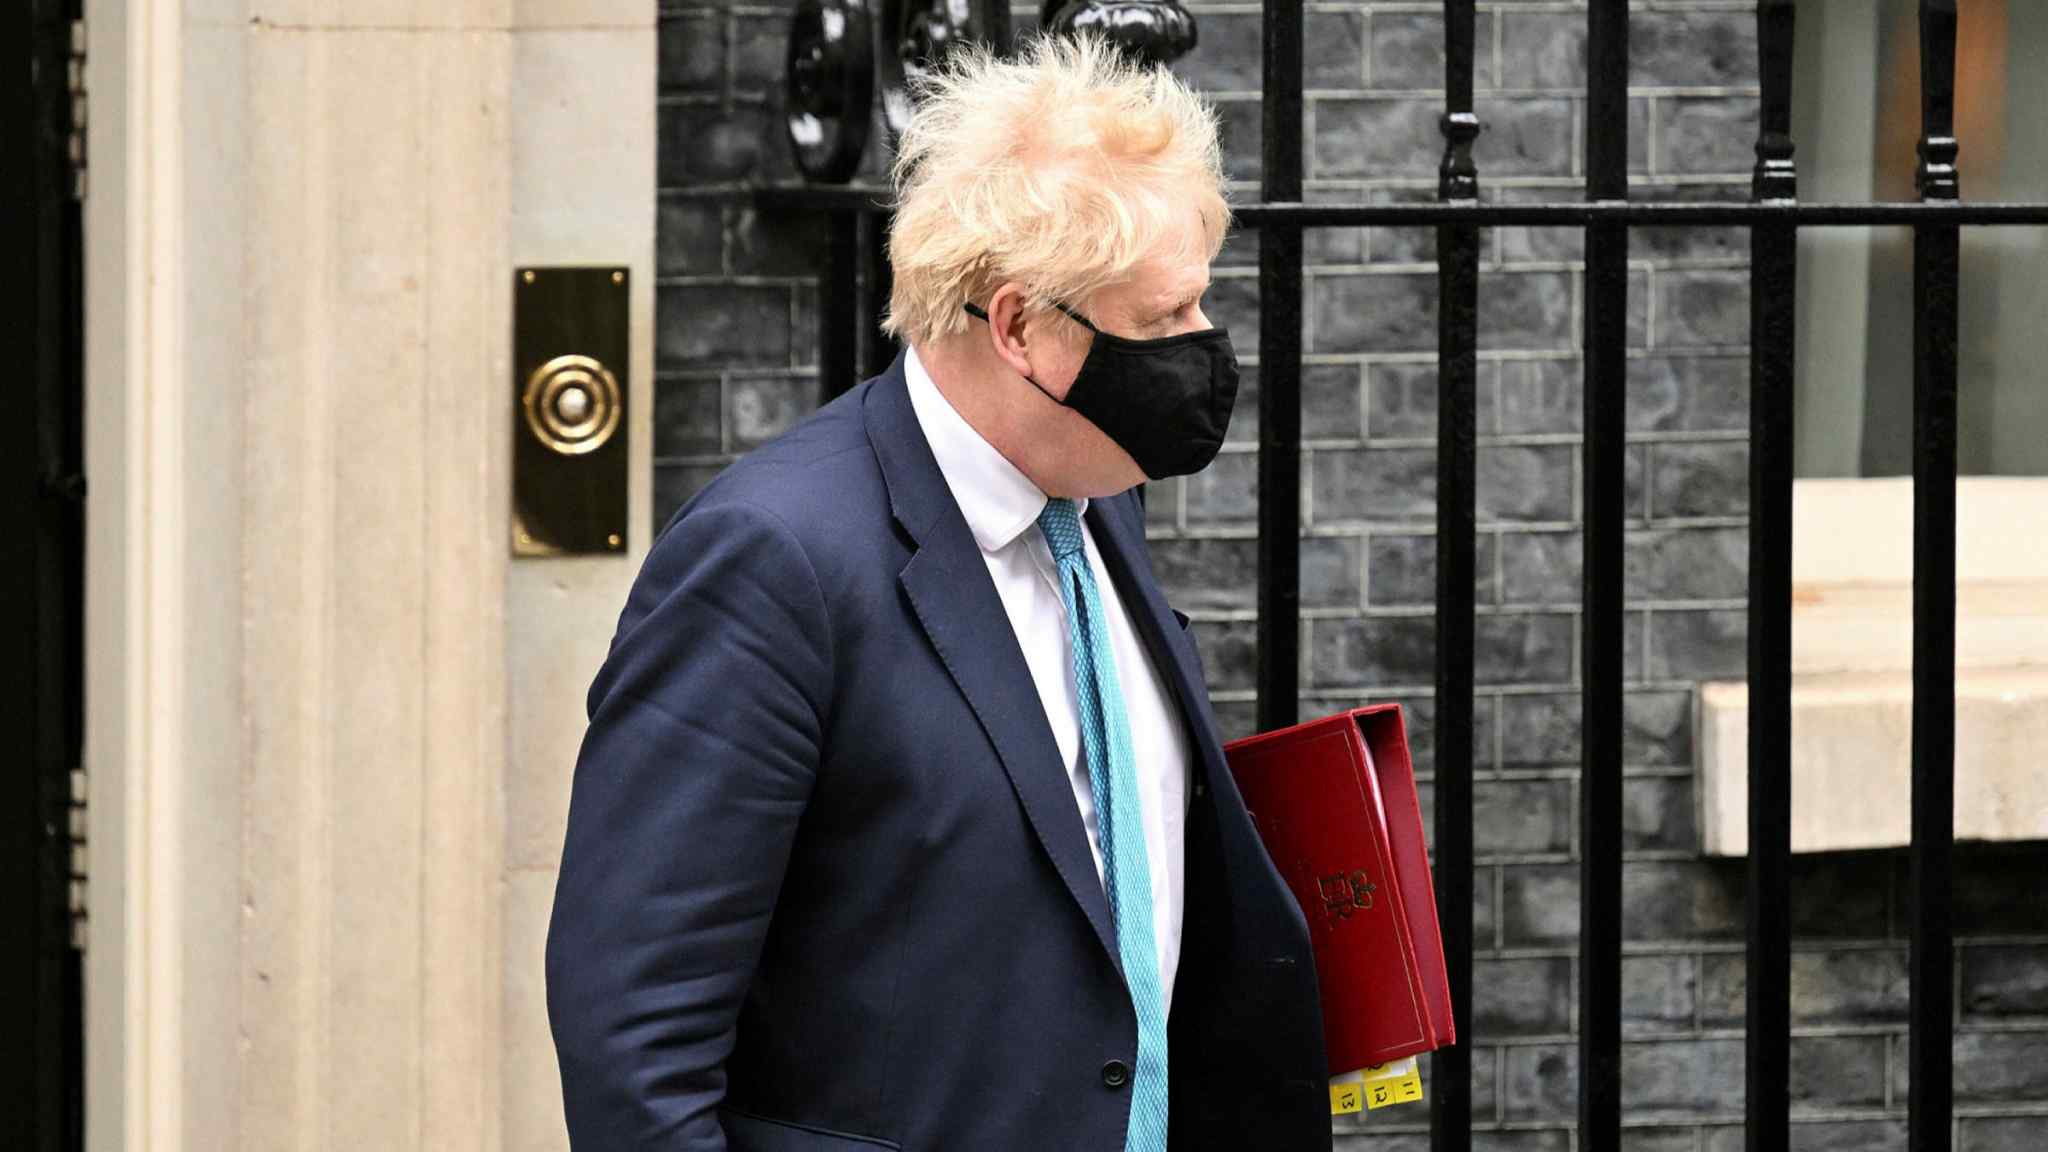 Live news: Boris Johnson faces MPs ahead of publication of party report